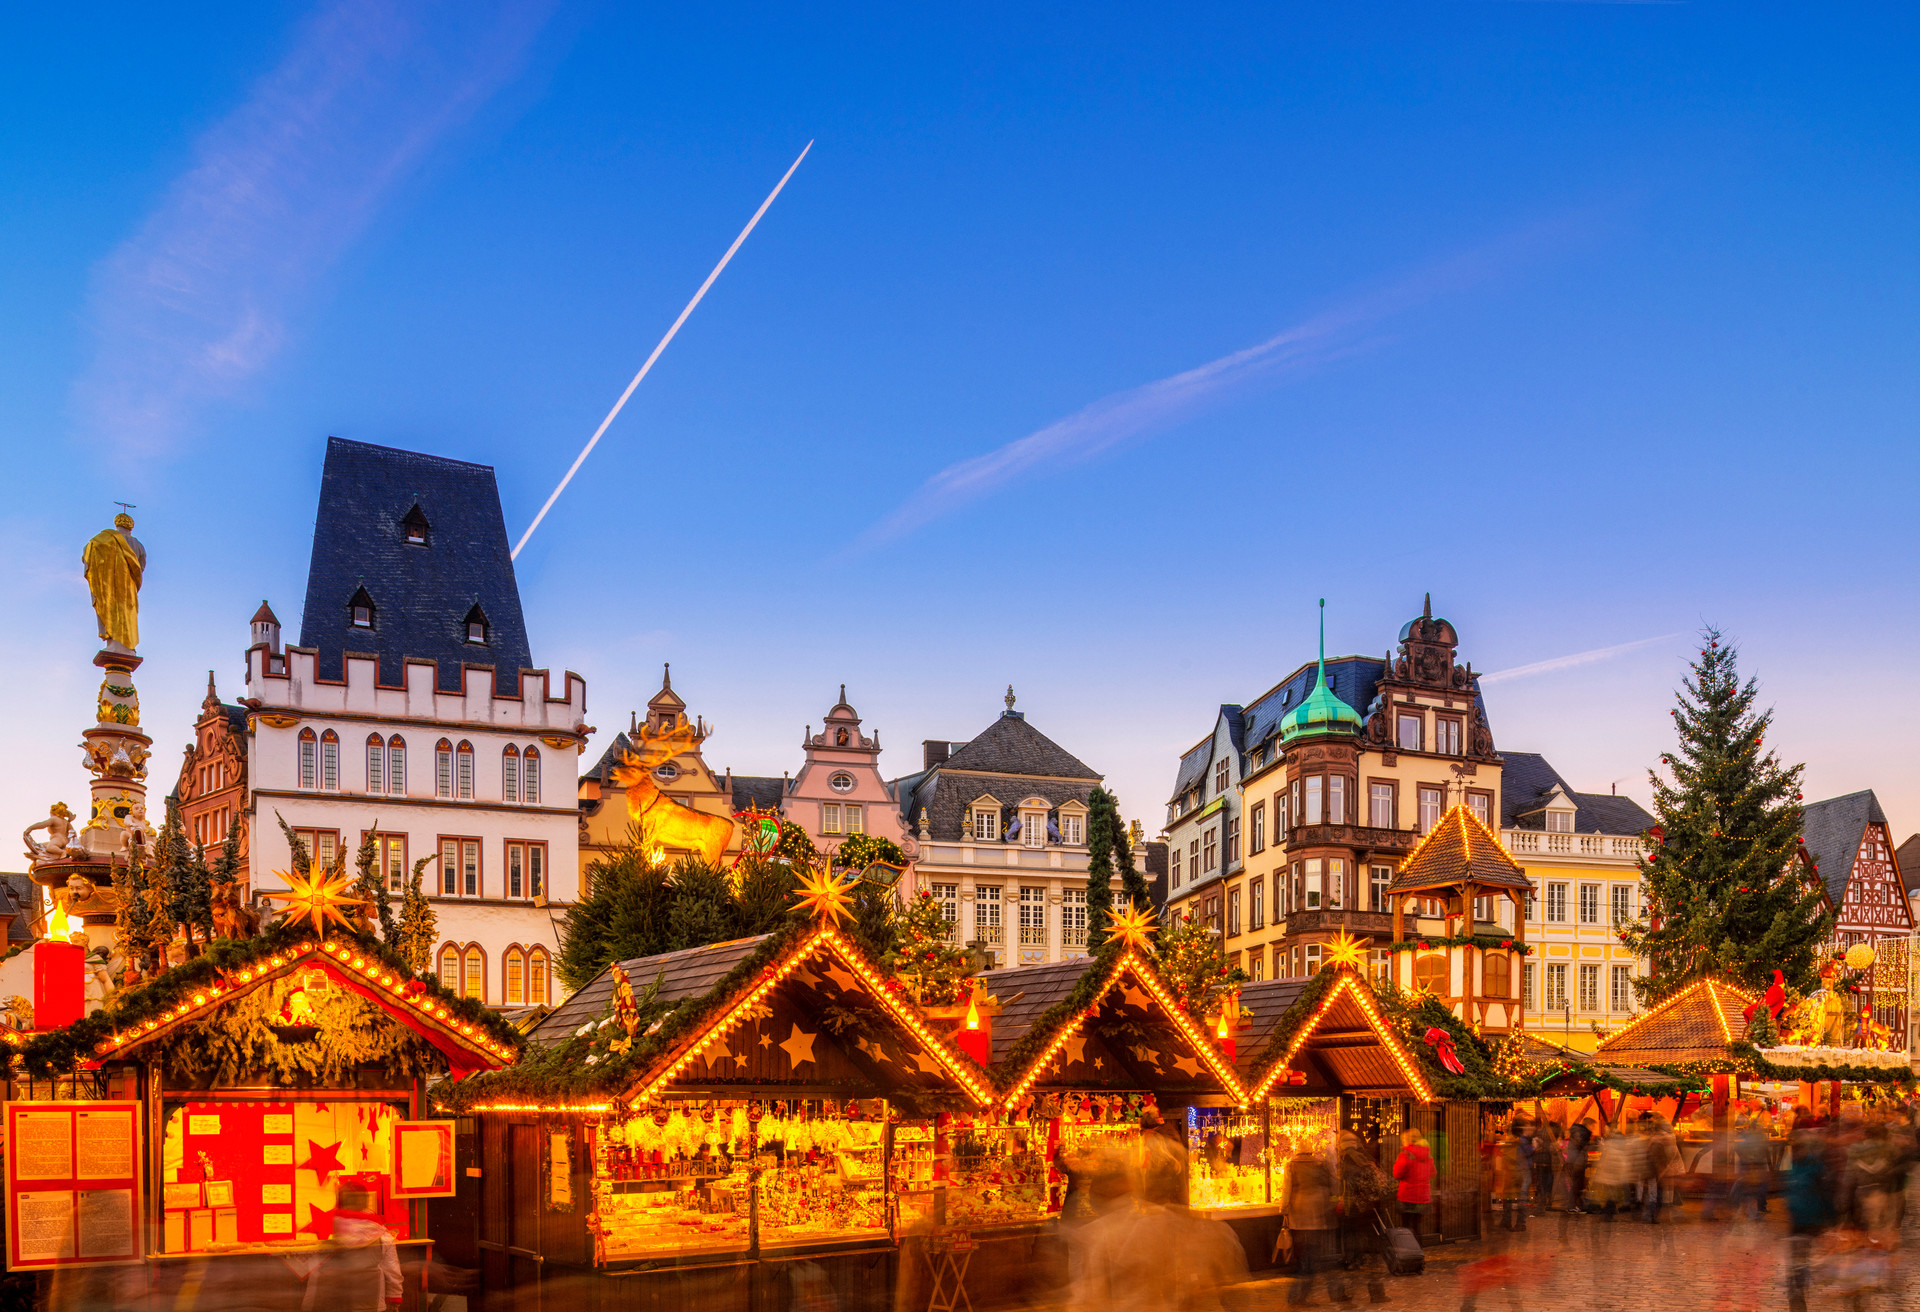 The christmas market at the public town square of the historic town of Trier, Germany.